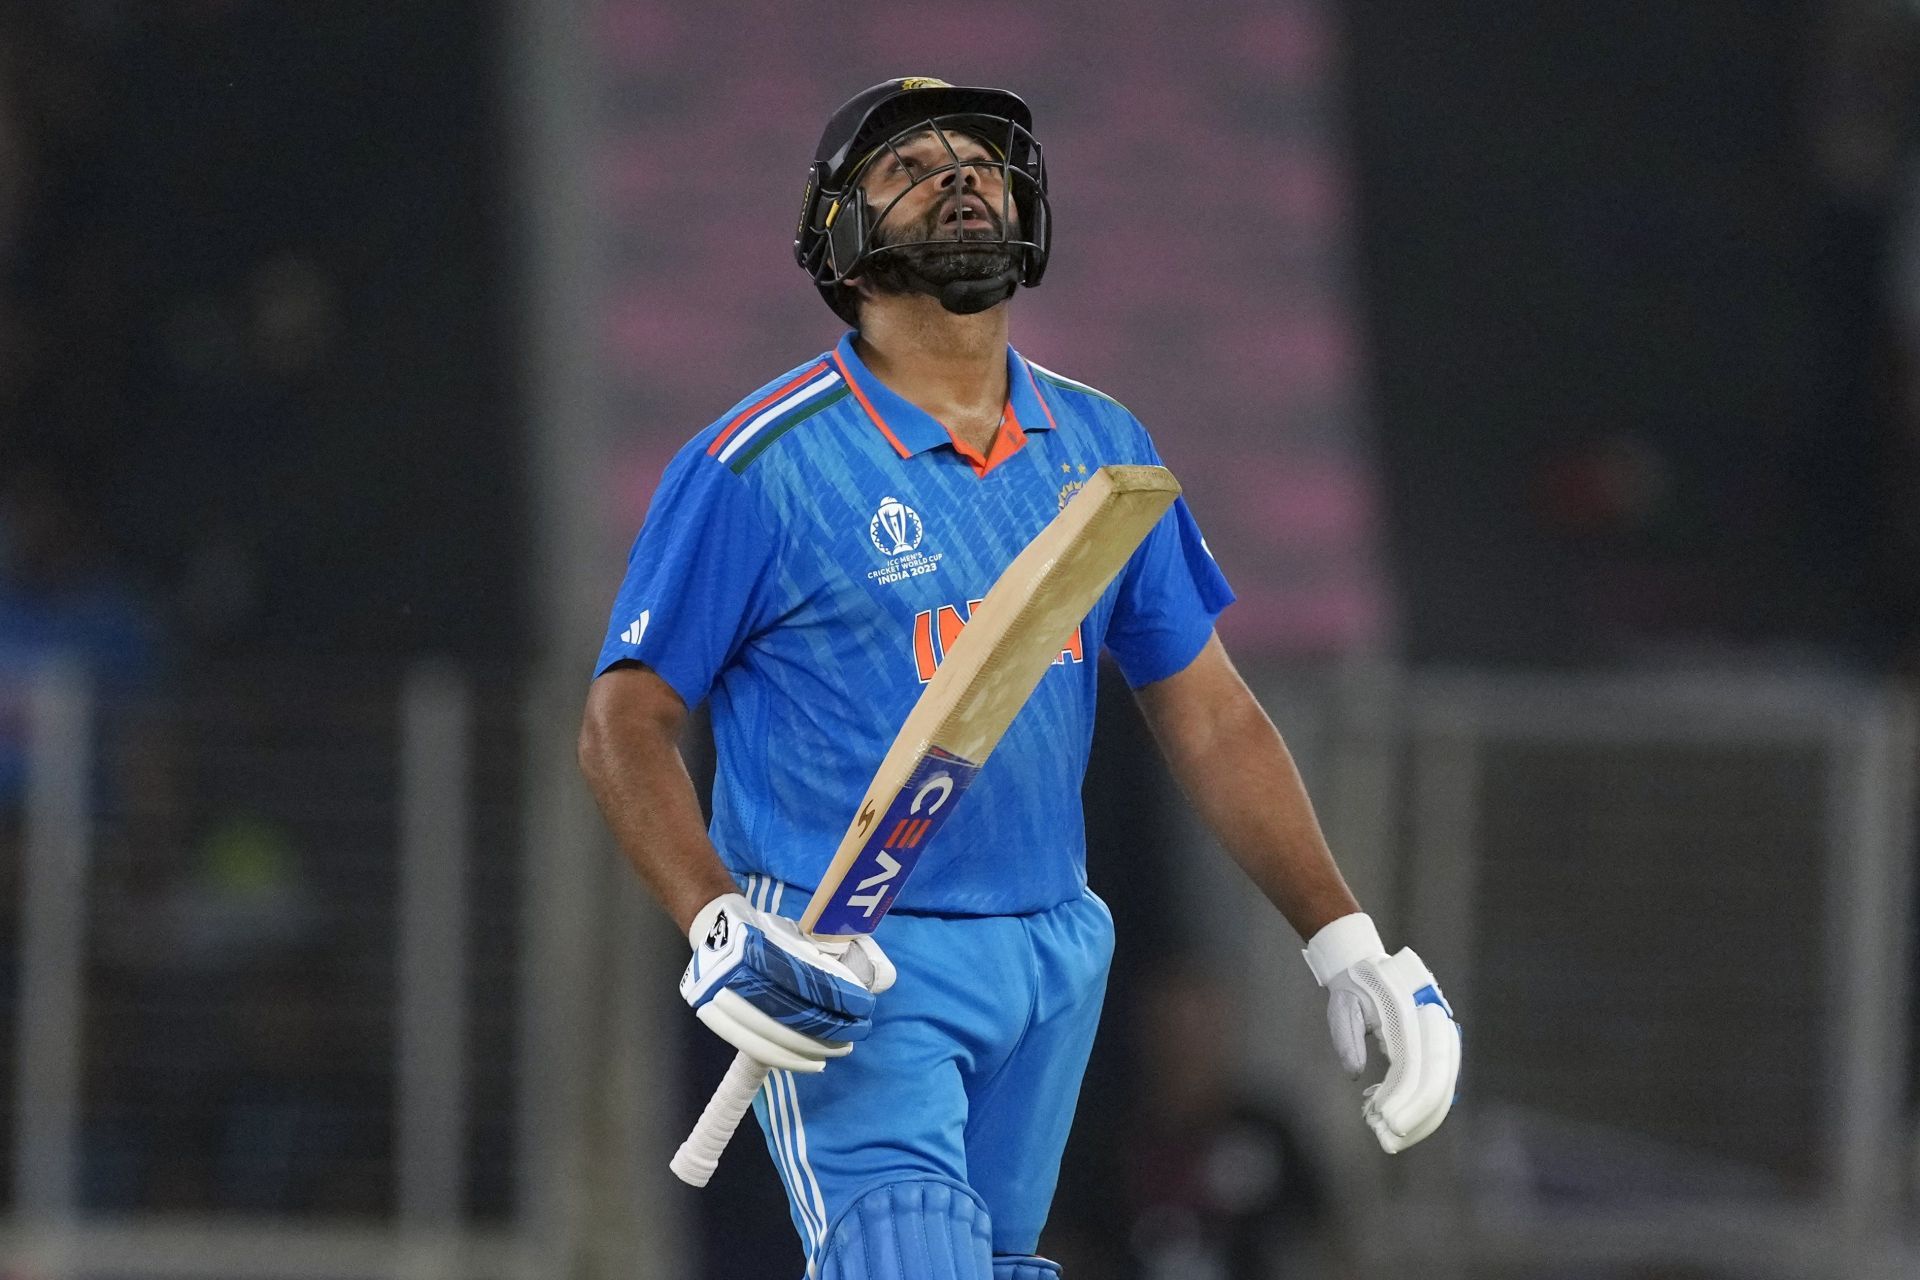 Rohit Sharma reached his fifty off just 36 deliveries. [P/C: AP]